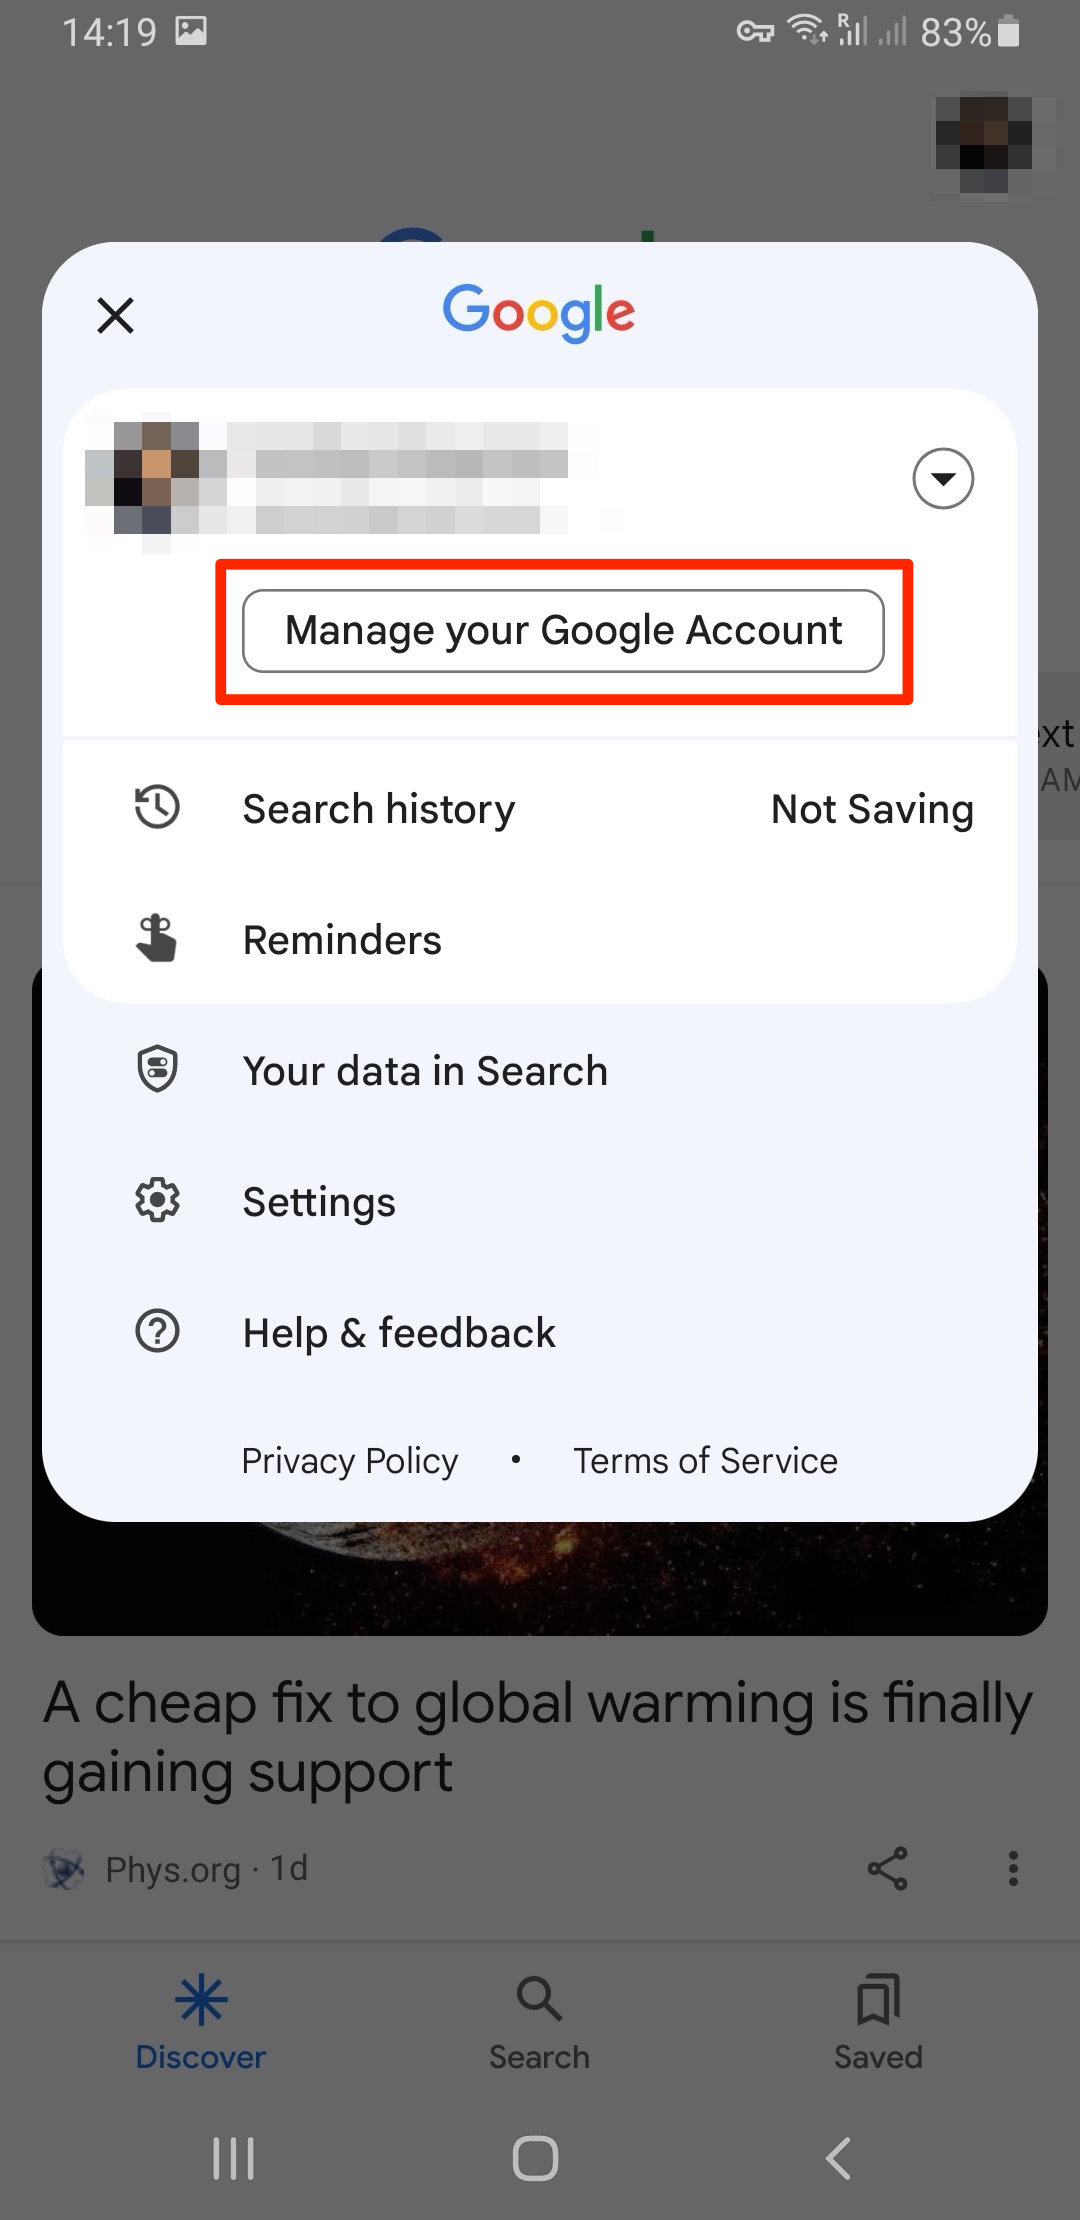 Tap Manage your Google account